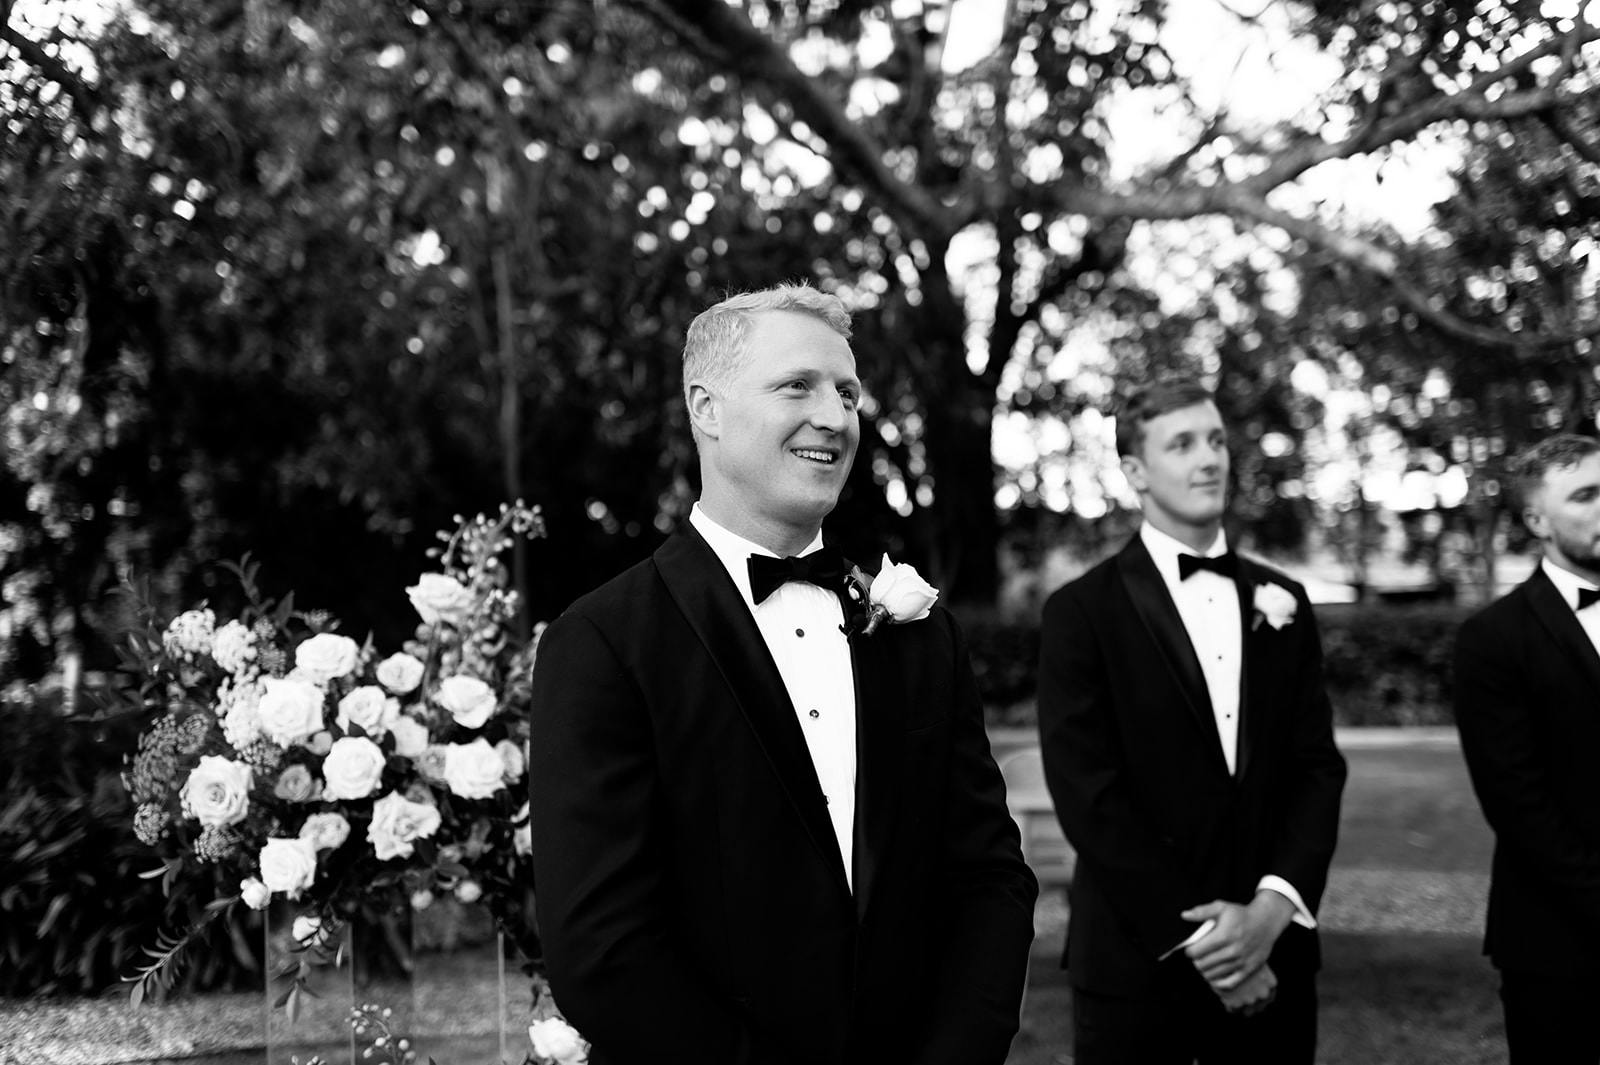 A groom in a tuxedo smiles happily while standing outdoors next to two groomsmen, also in tuxedos. Behind them, there is a lush garden area with trees and flowers. The scene is festive, and the men look poised and joyful.